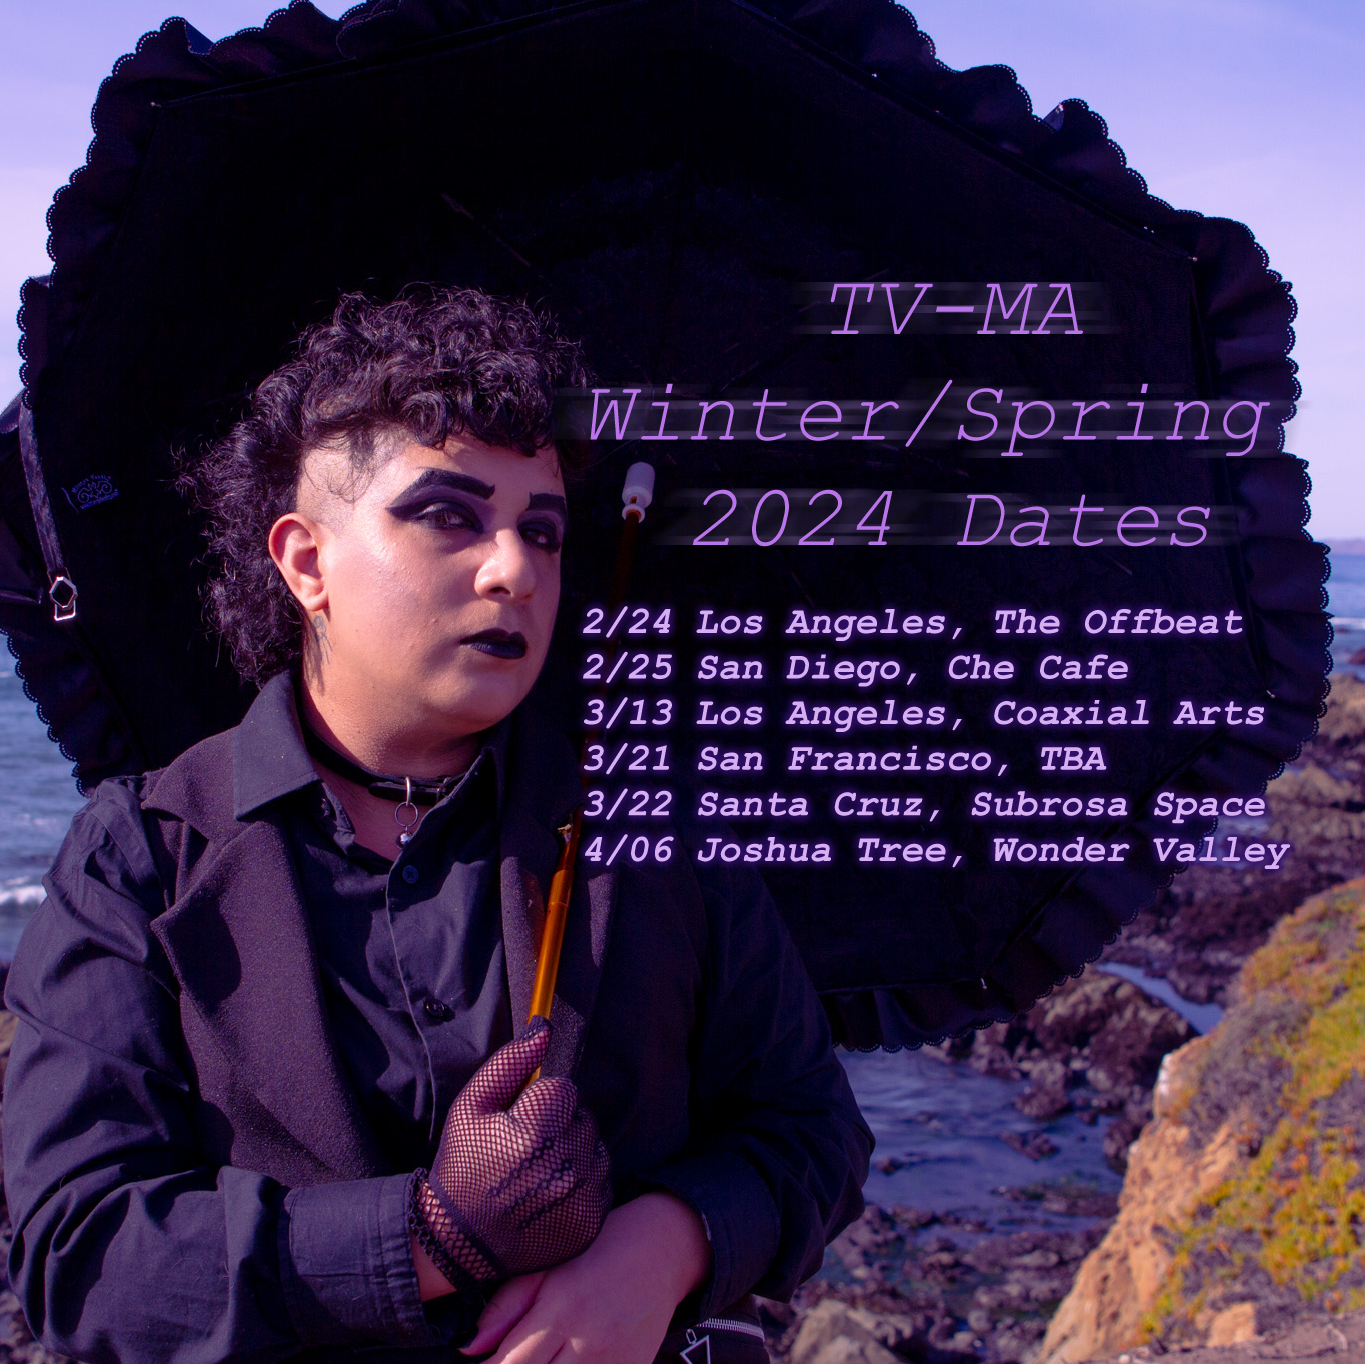 Poster for TV-MA spring 2024 dates. I’m in a black fancy outfit holding a black fancy umbrella. Text: TV-MA Winter/Spring 2024 dates. 2/24 Los Angeles, The Offbeat. 2/25 San Diego, Che Café. 3/13 Los Angeles, Coaxial Arts. 3/21 San Francisco, TBA. 3/22 Santa Cruz, Subrosa Space. 4/06 Joshua Tree, Wonder Valley